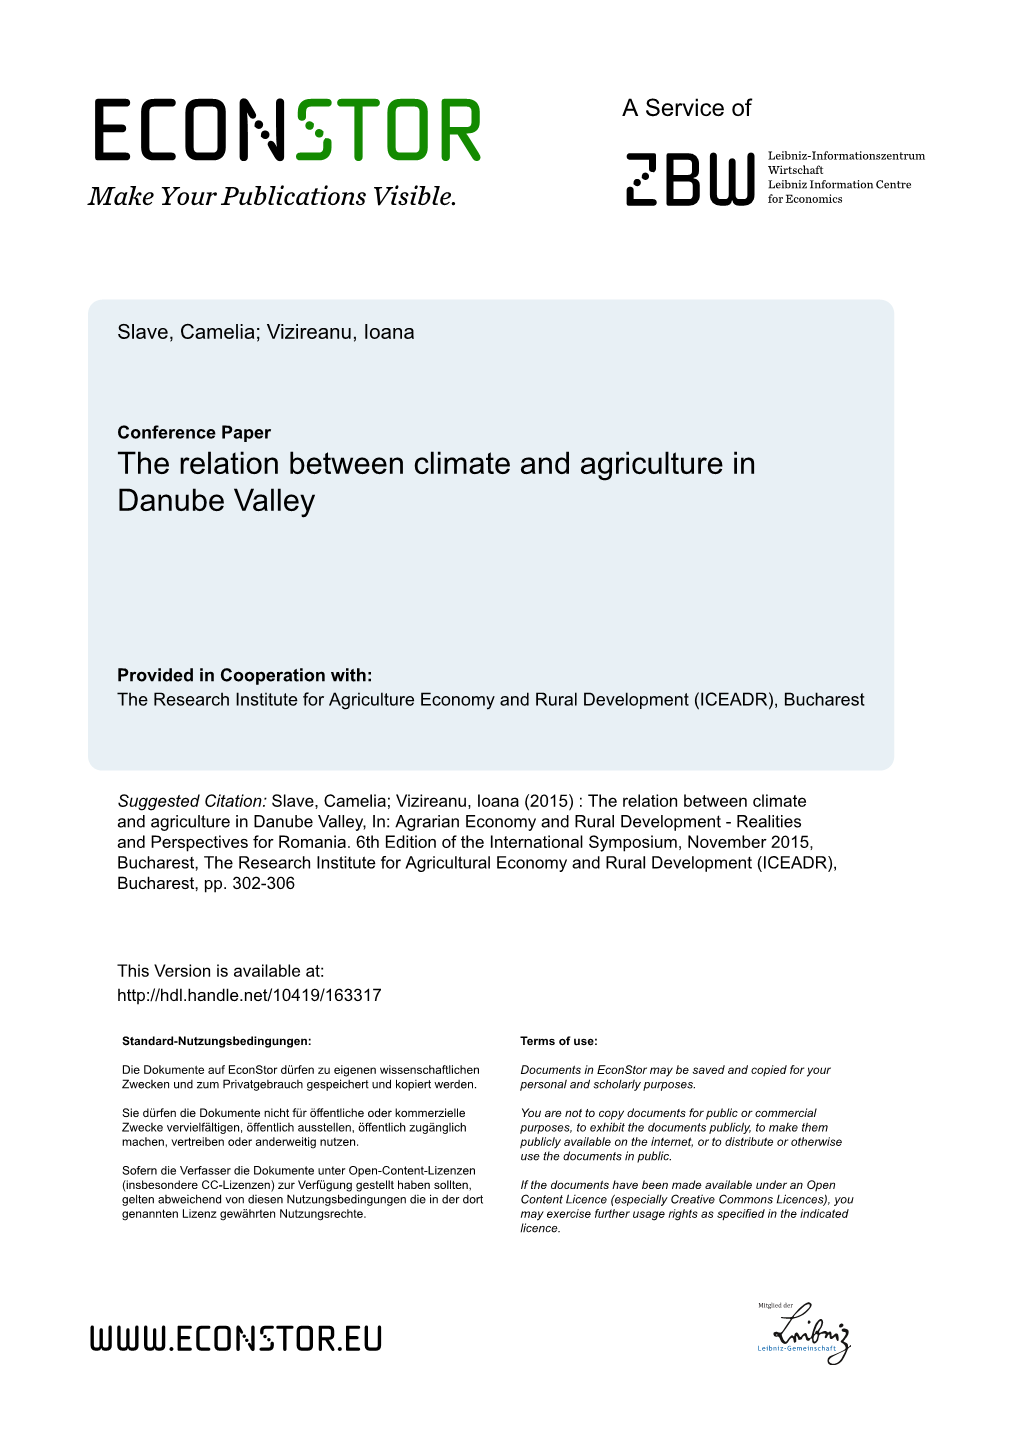 The Relation Between Climate and Agriculture in Danube Valley